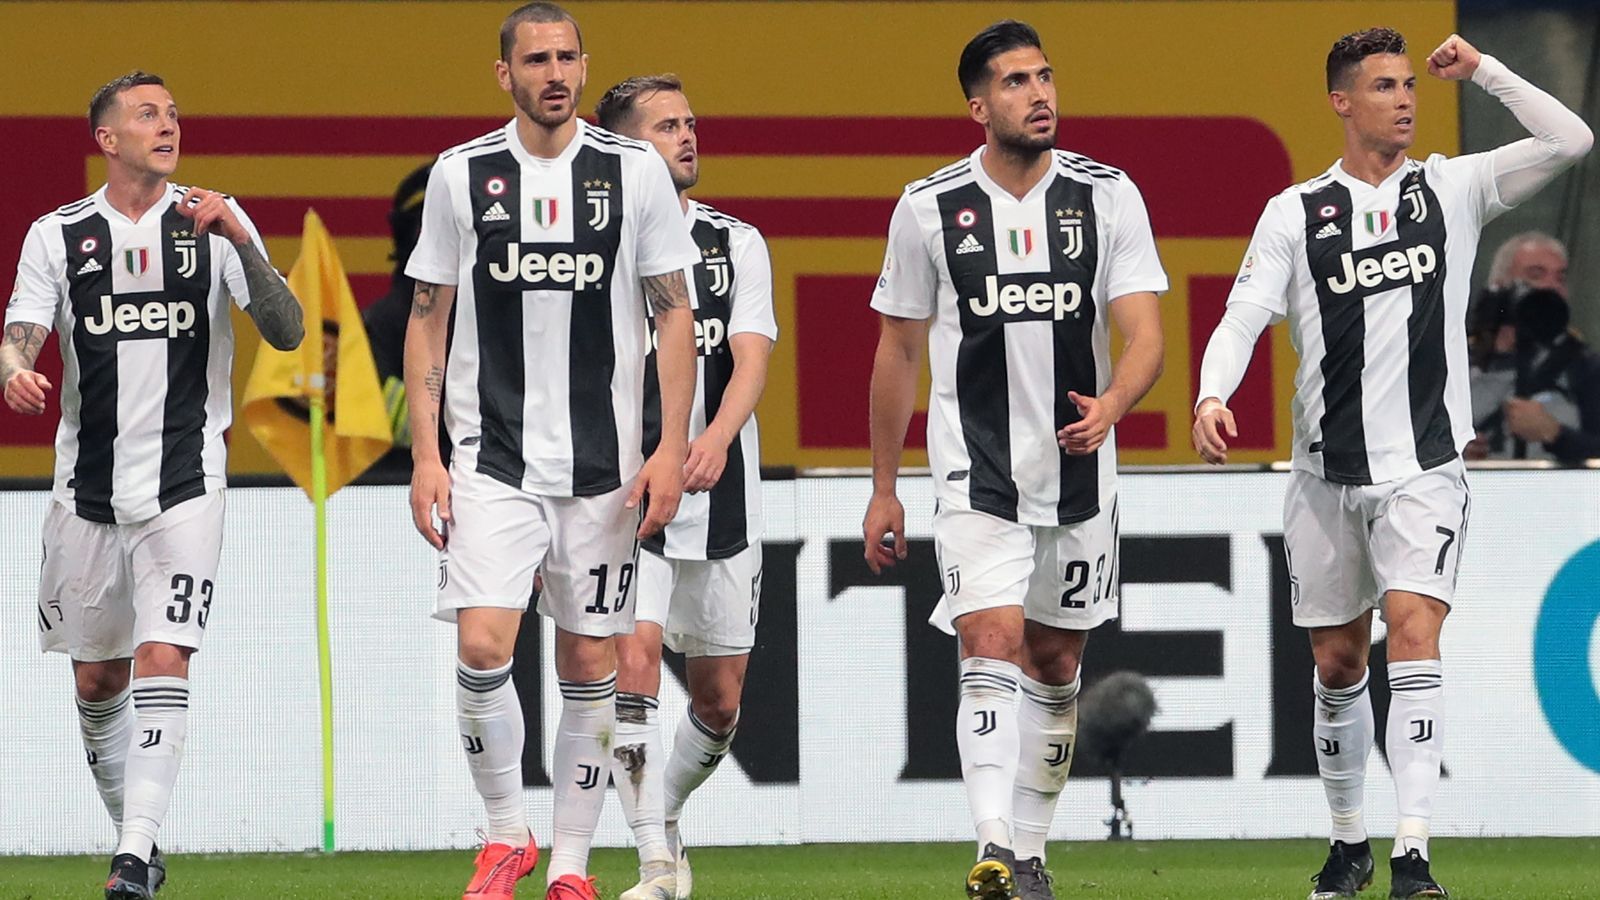 
                <strong>Juventus Turin</strong><br>
                Land: ItalienQualifiziert als: Meister in der Serie A
              